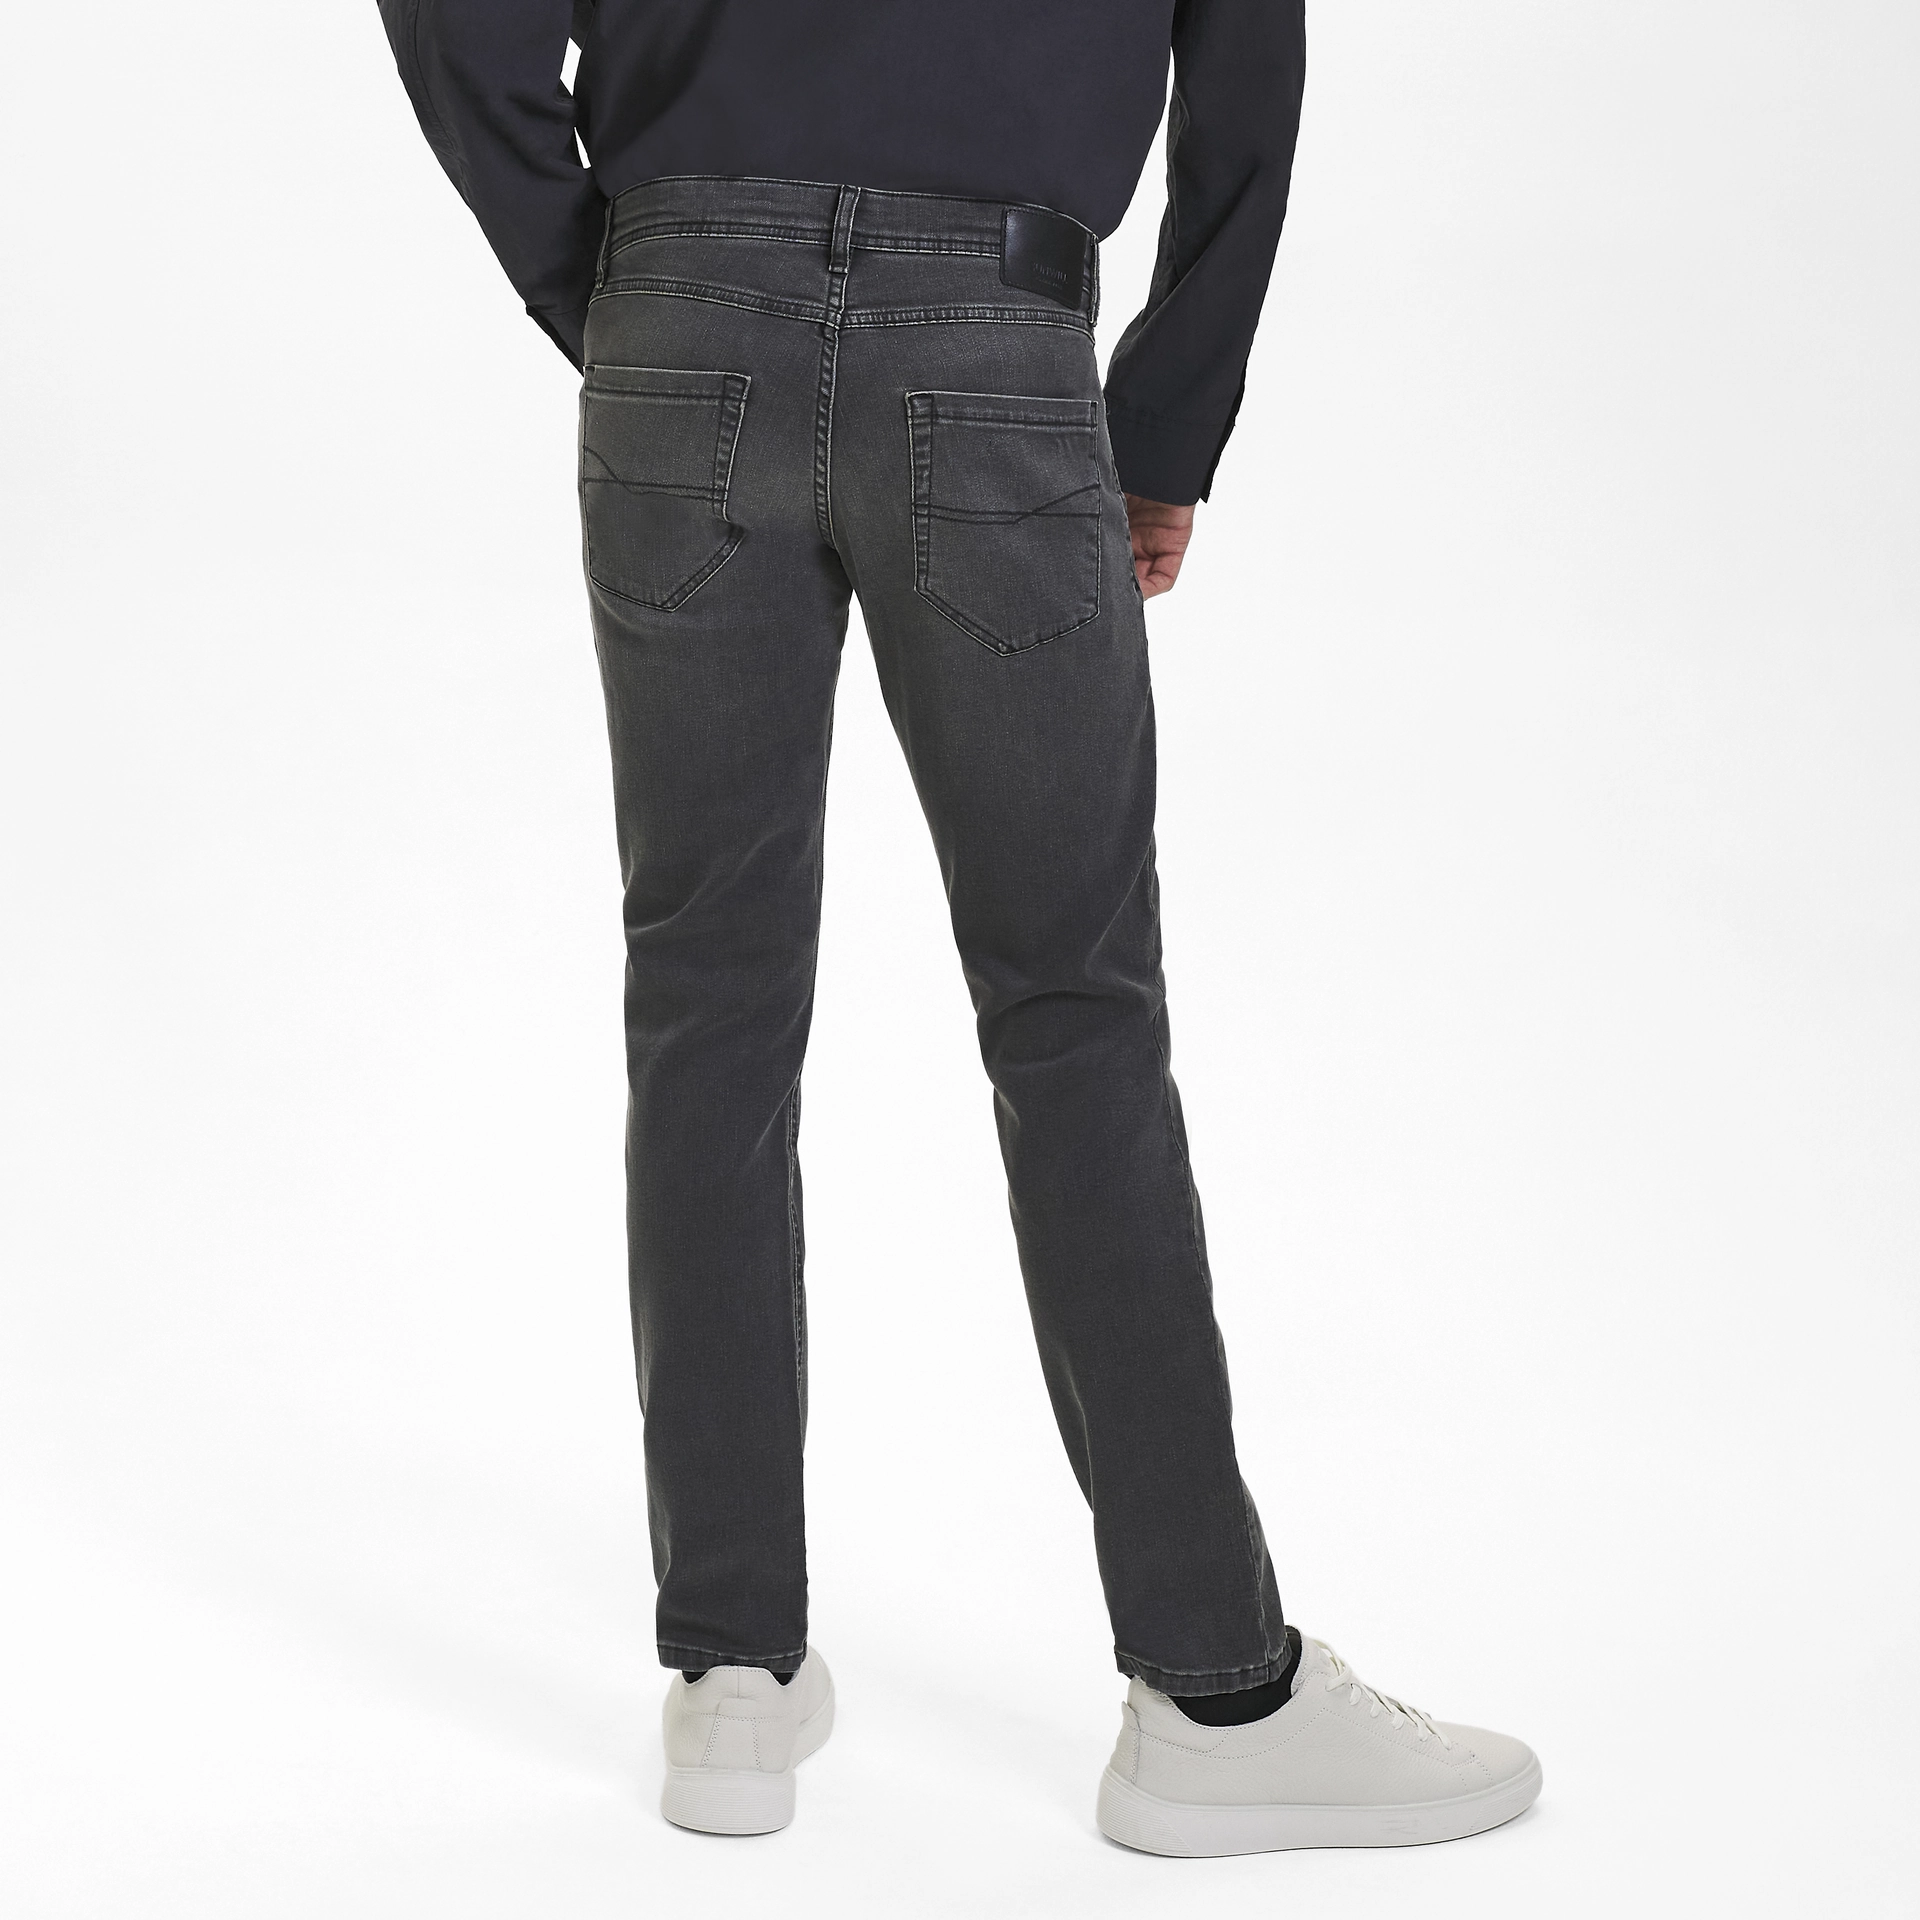 Super Stretch Jeans in Fitted Fit